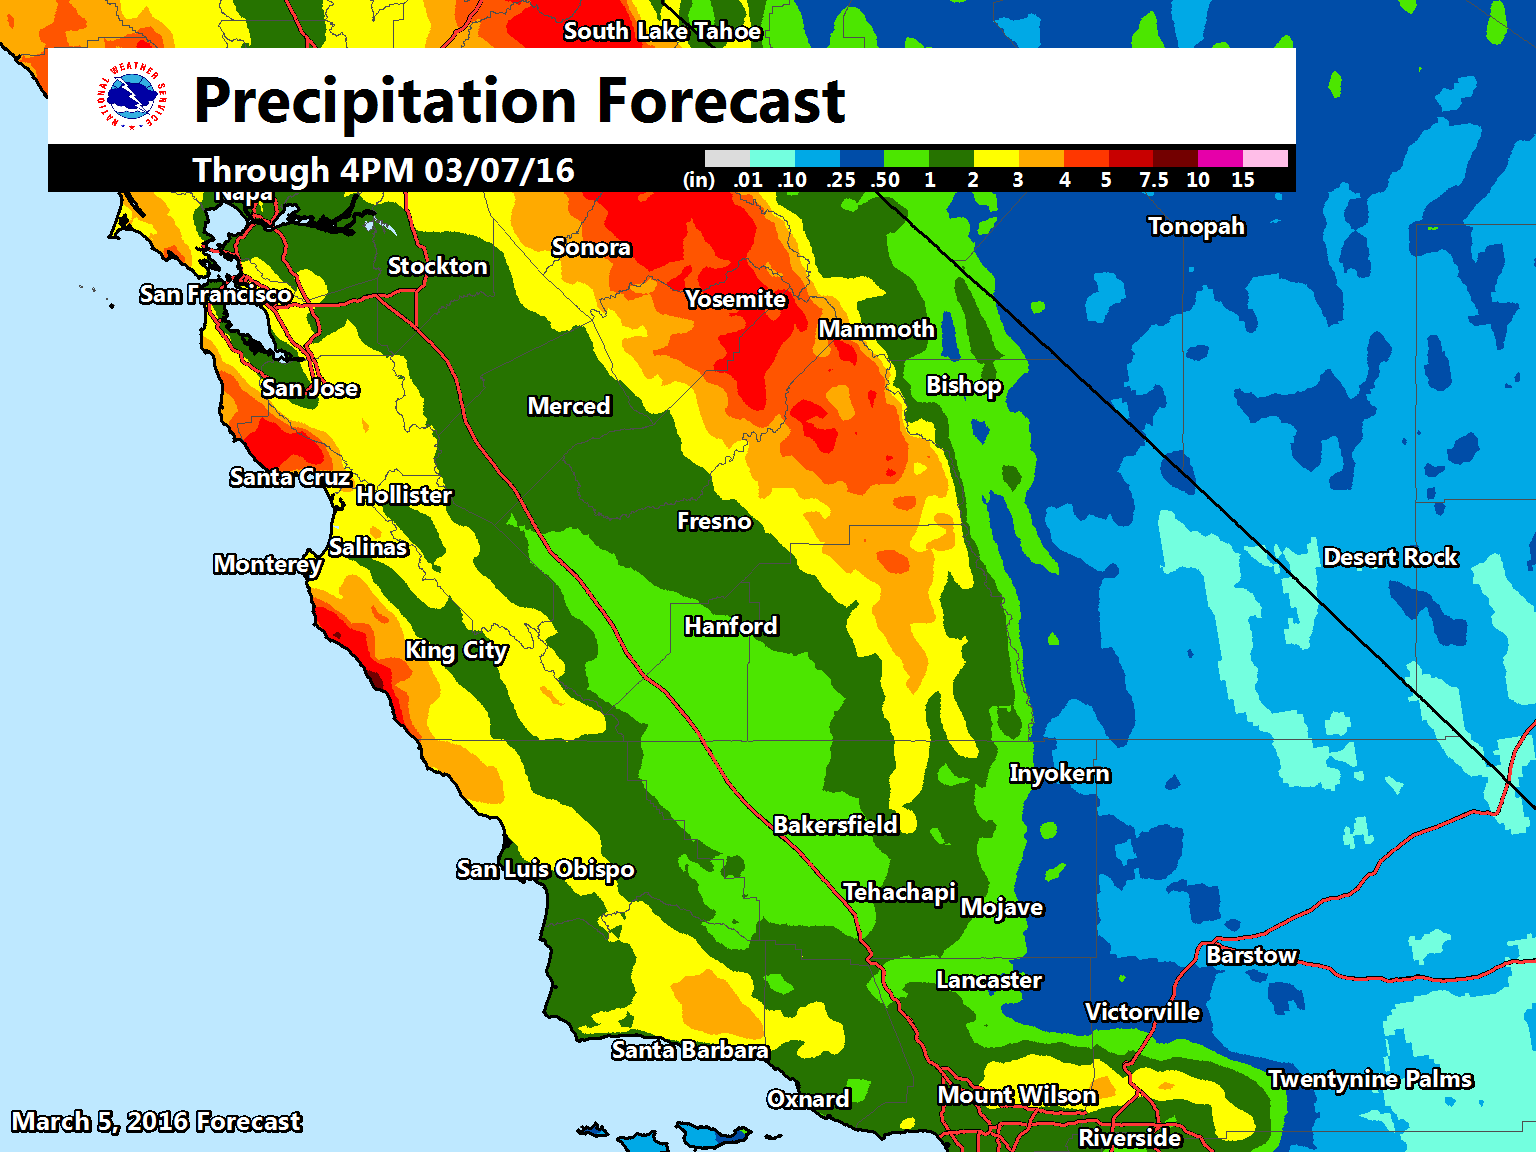 "Forecast precipitation from Saturday morning through Monday afternoon in SoCal." - NOAA Hanford, CA today